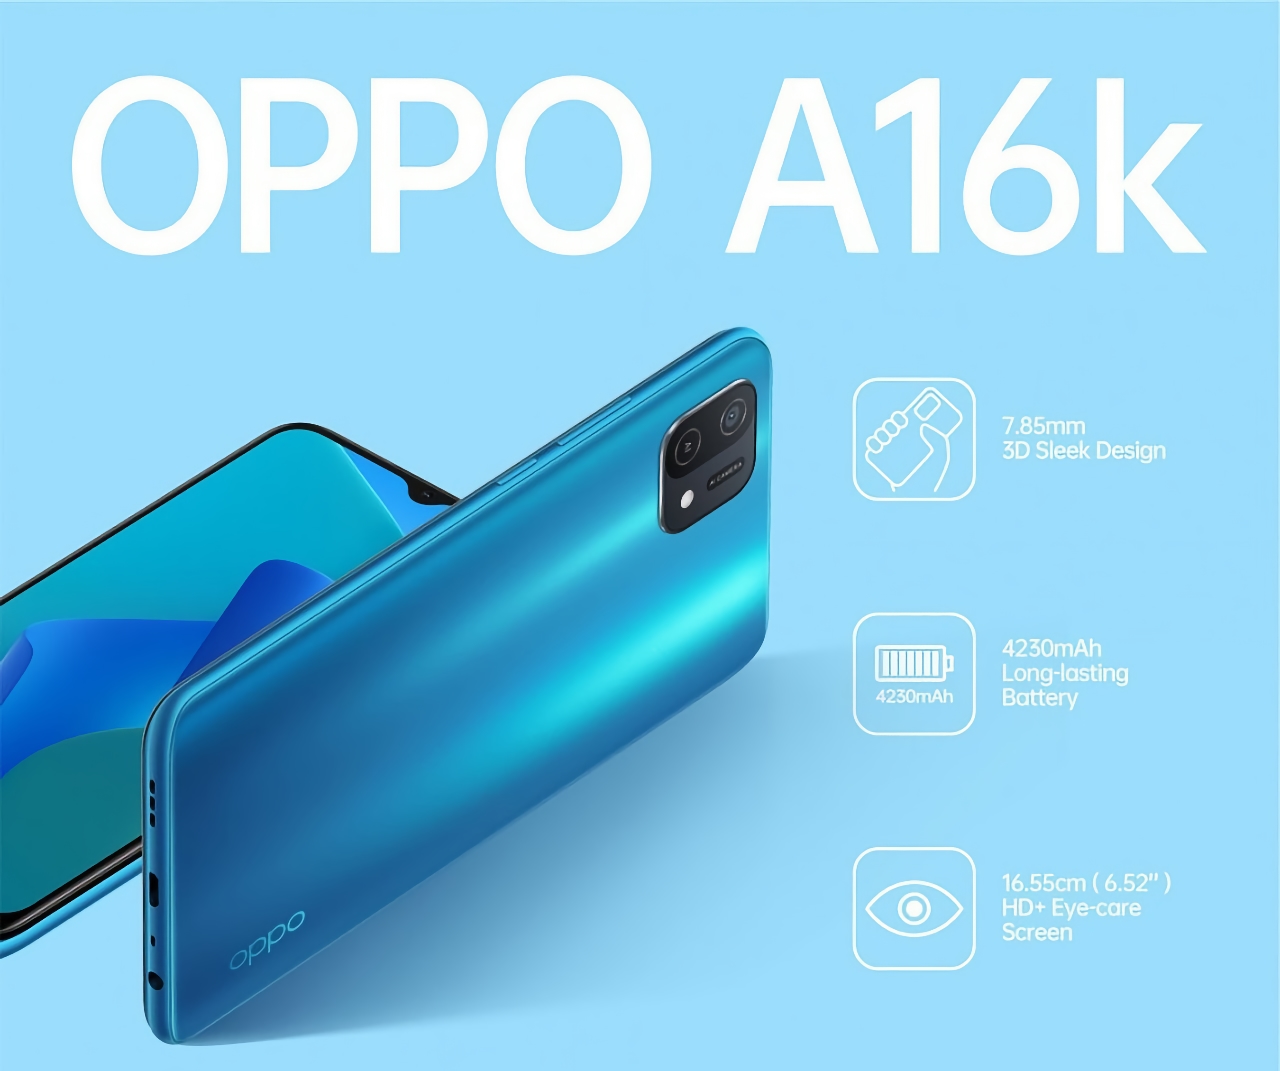 OPPO A16k: MediaTek Helio G35 chip, 4230mAh battery and $140 price tag